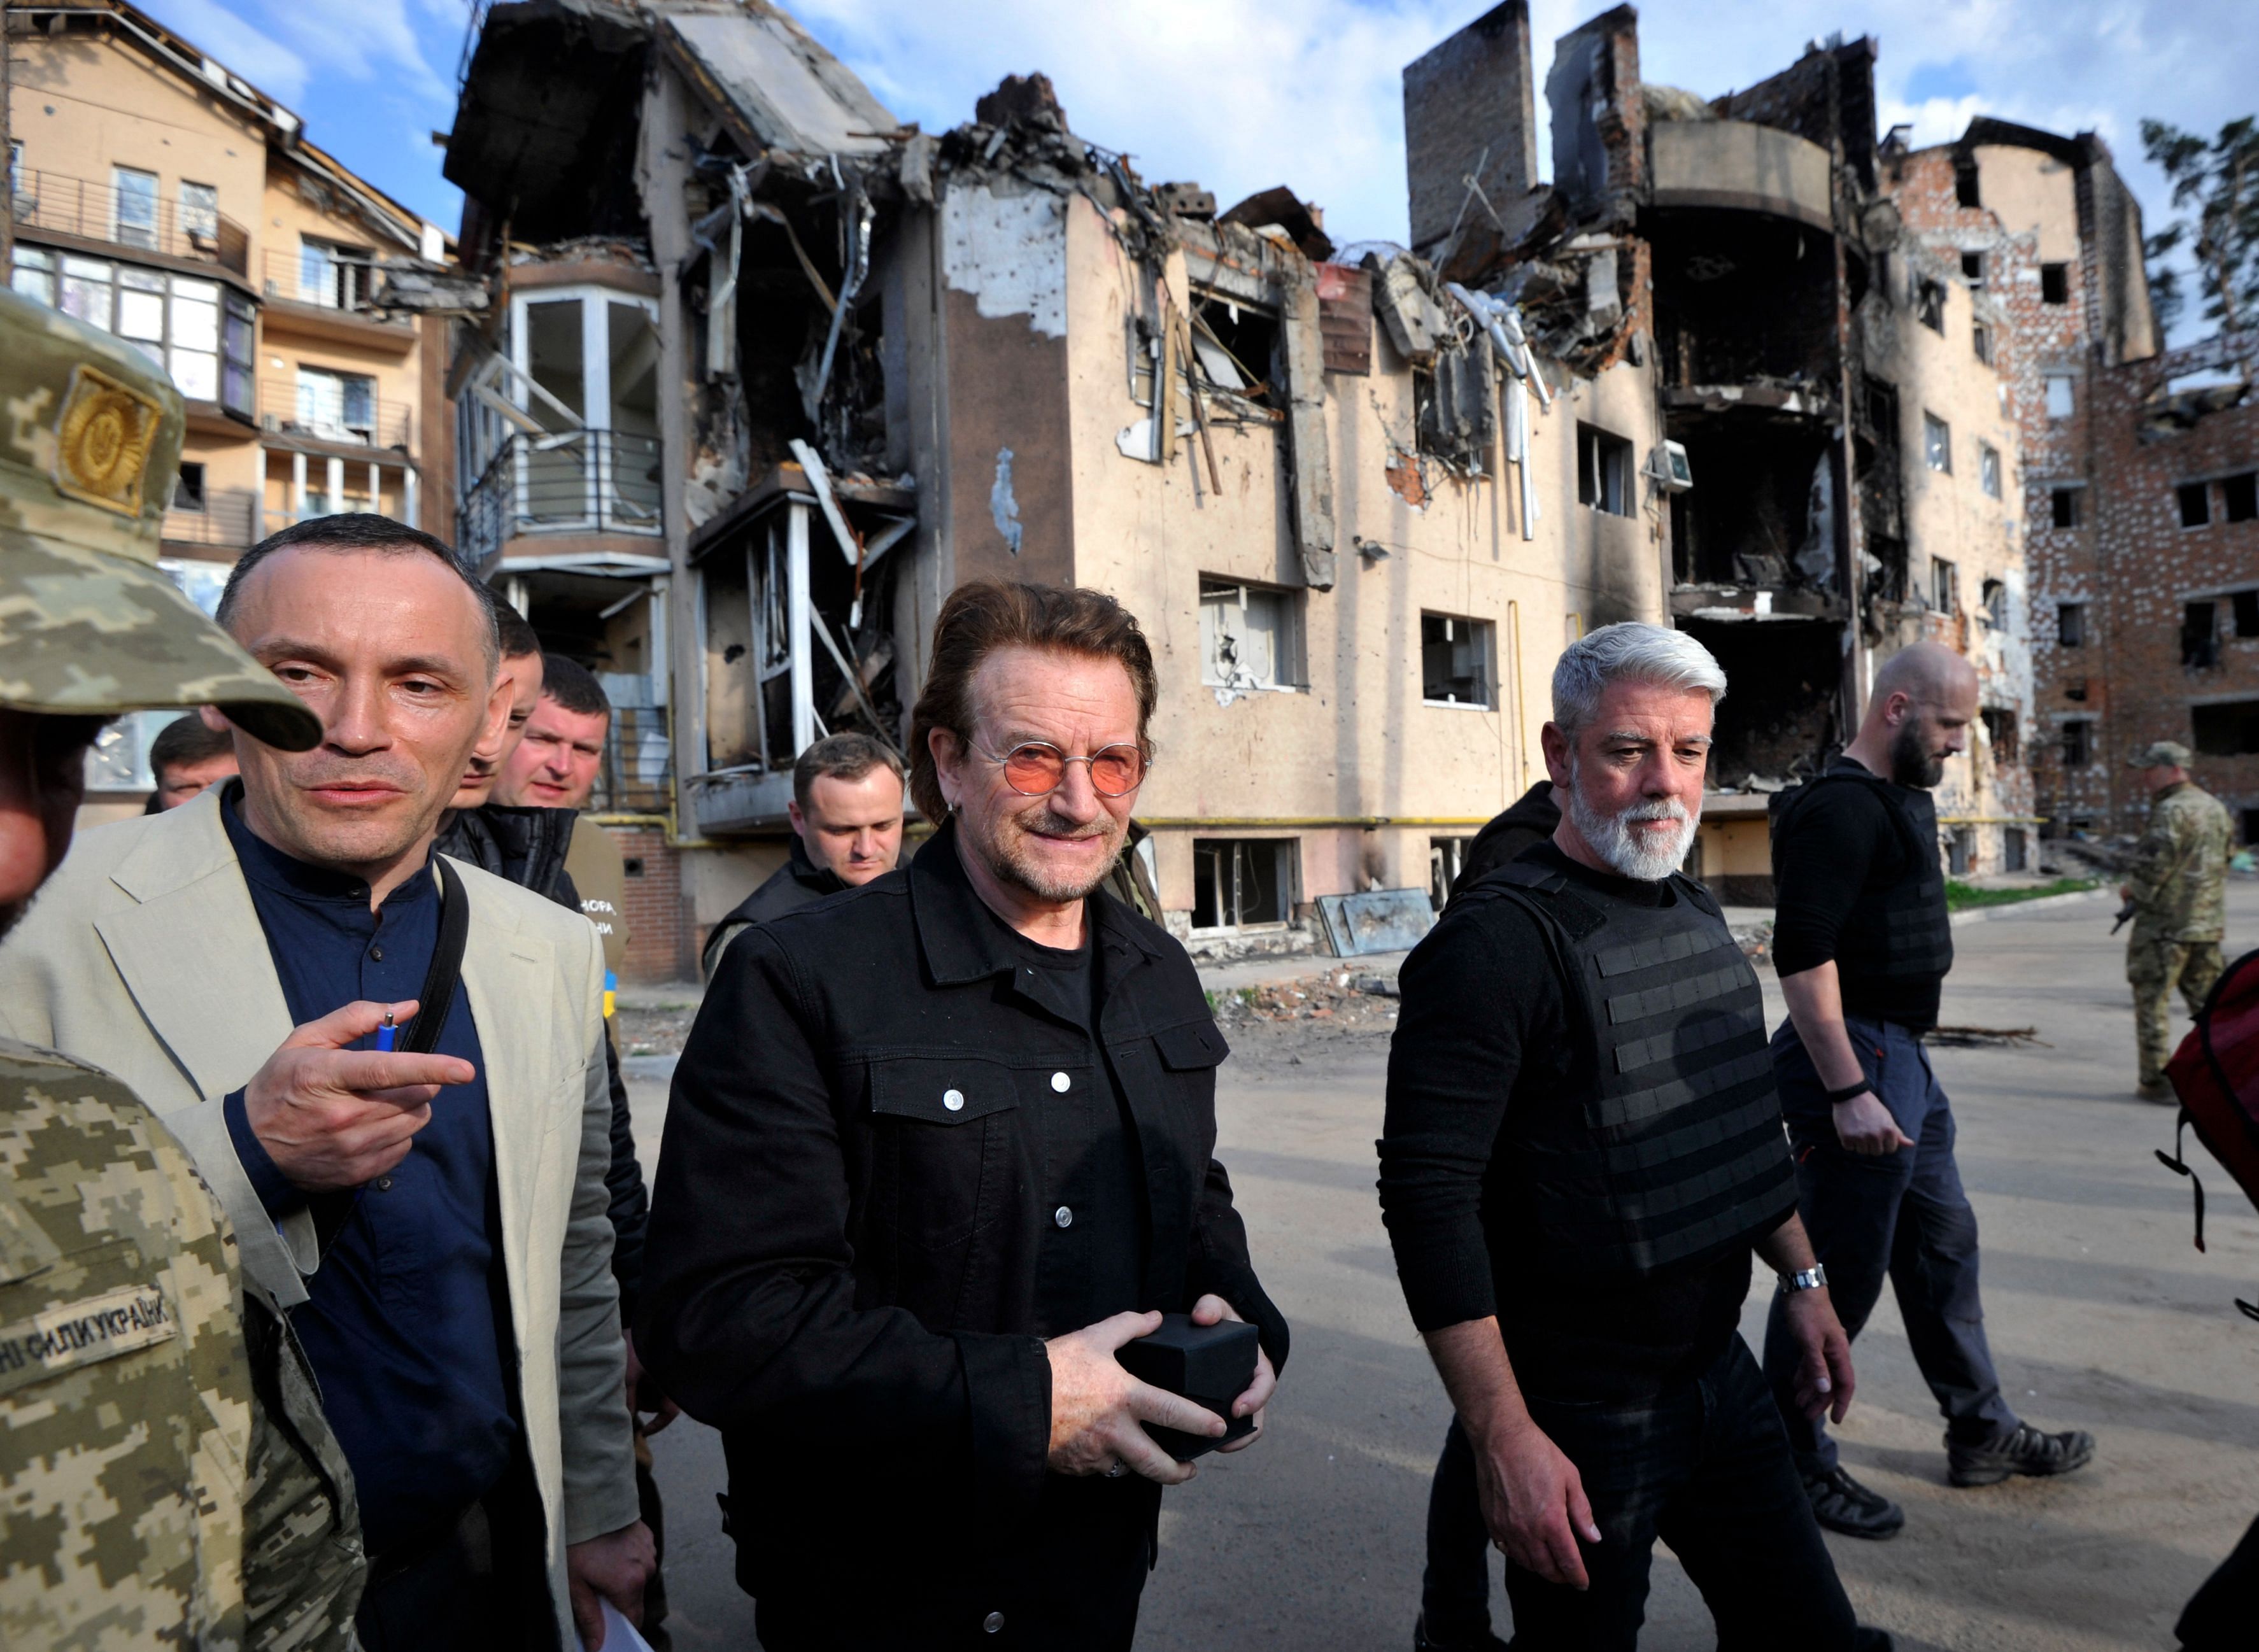 Bono (C) (Paul David Hewson), activist and front man of the Irish rock band U2 inspects the damage to a residential area in the Ukrainian town of Irpin, near Kyiv. Credit: AFP Photo